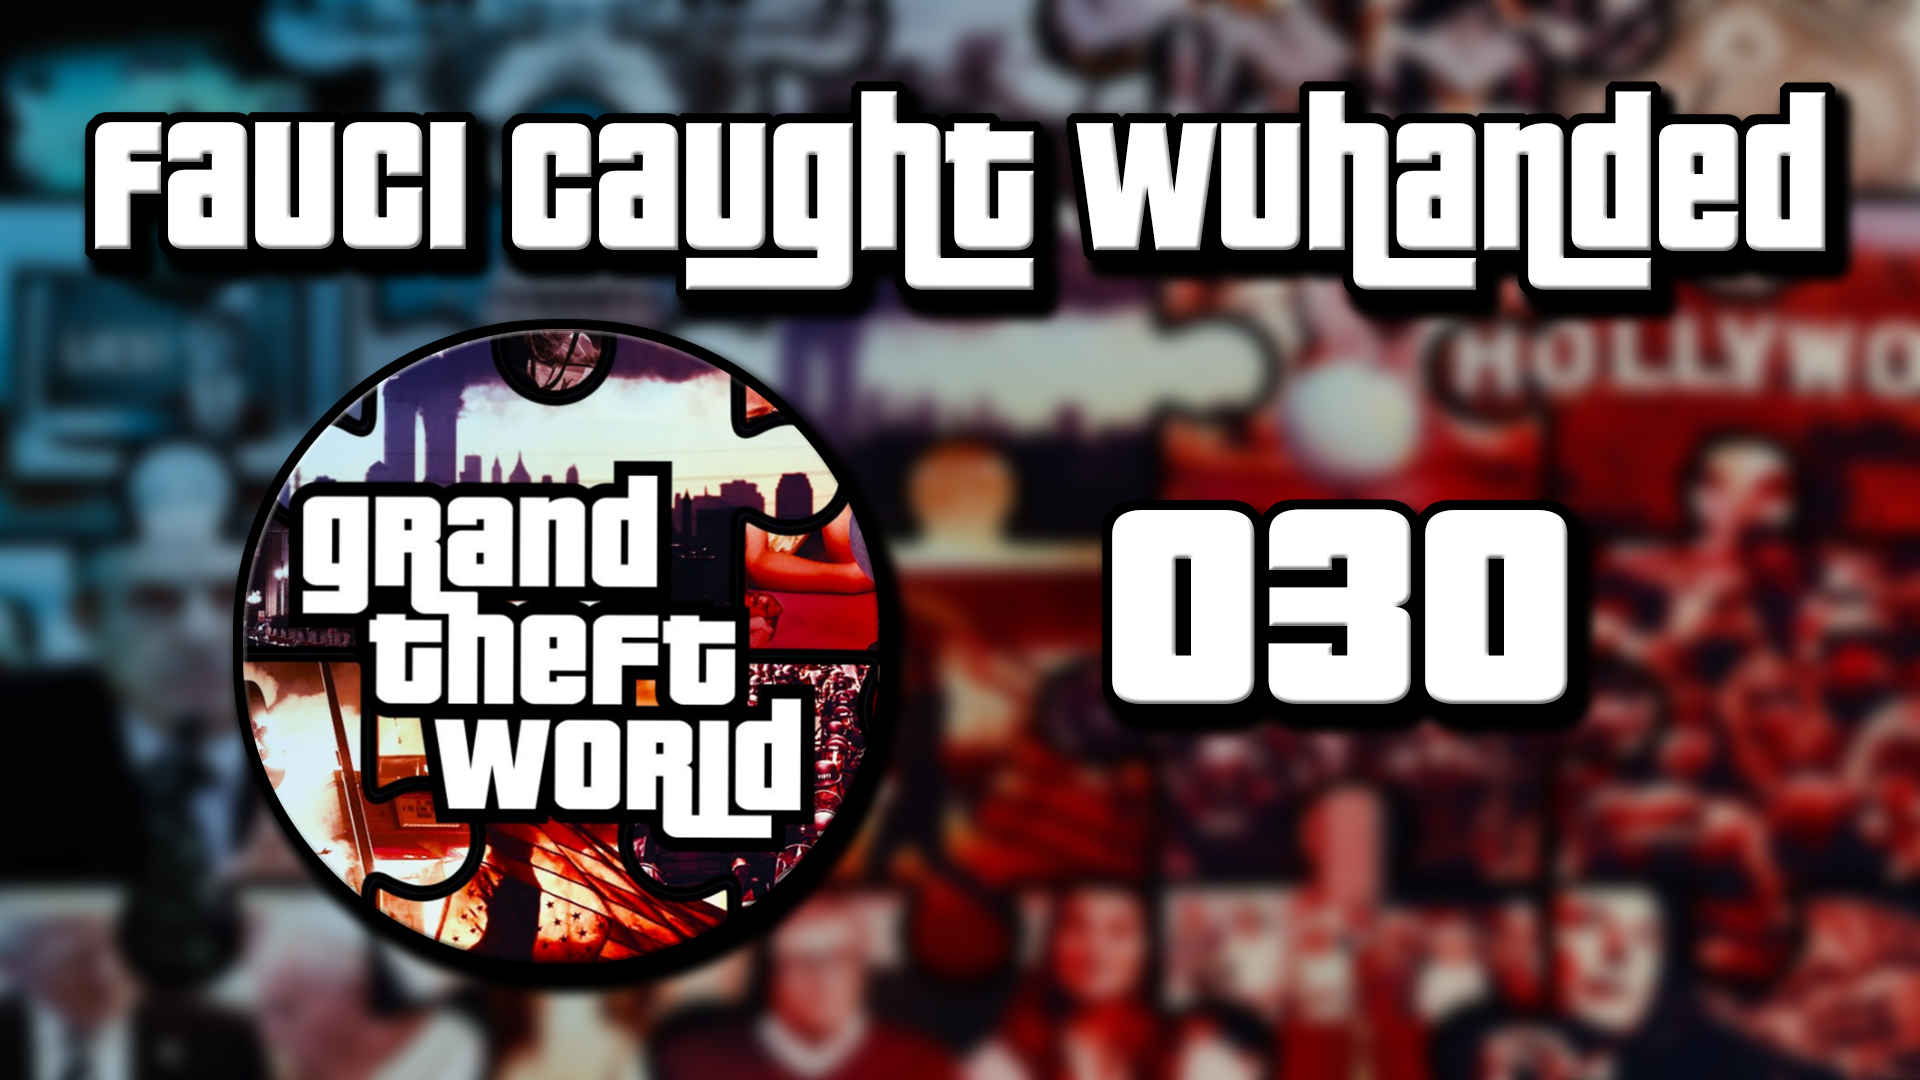 Grand Theft World Podcast 030 | Fauci Caught WuHanded